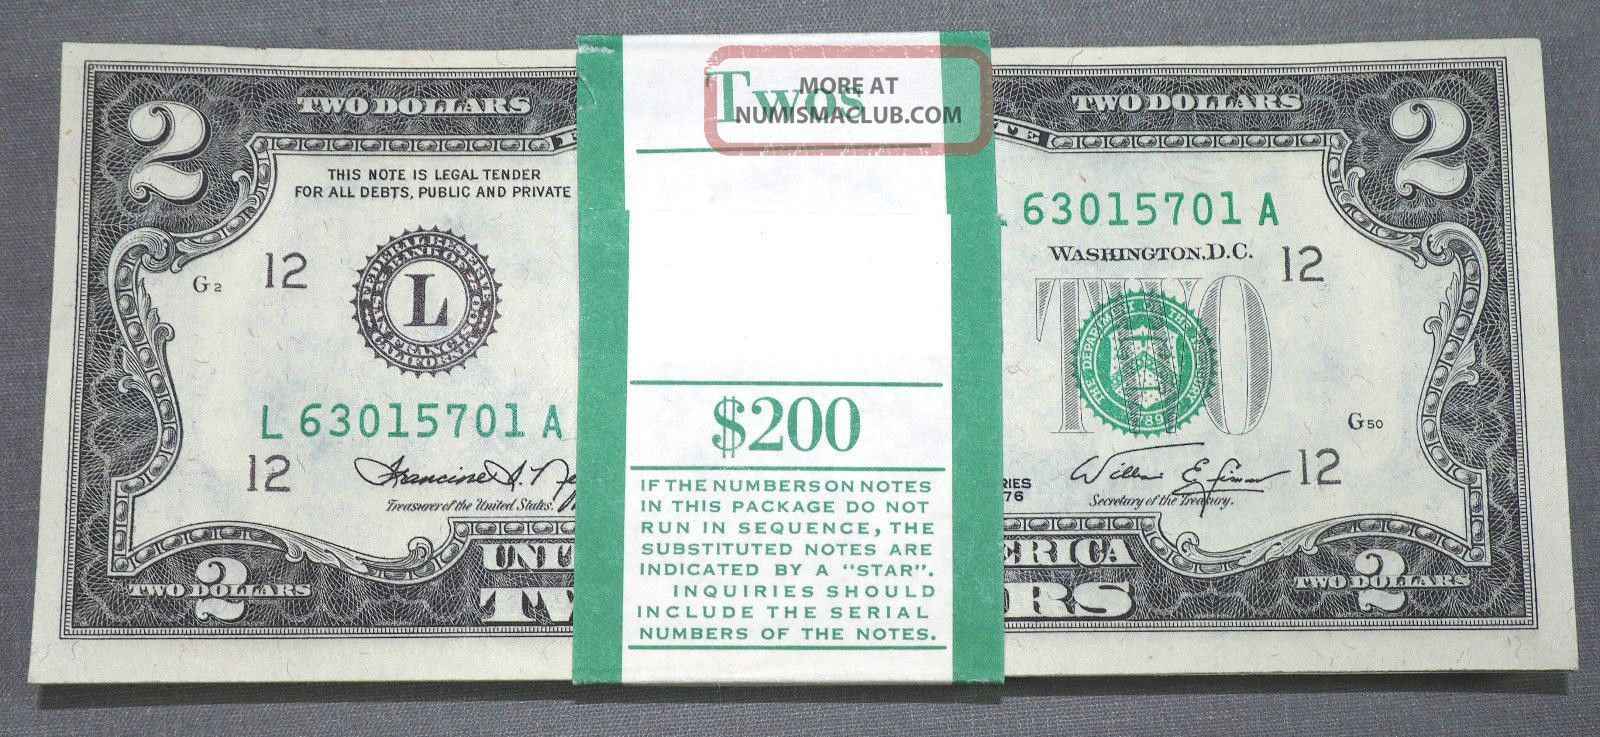 (100) 1976 Uncirculated Two Dollar $2 Bills - Sequential Banded San Francisco Ca Small Size Notes photo